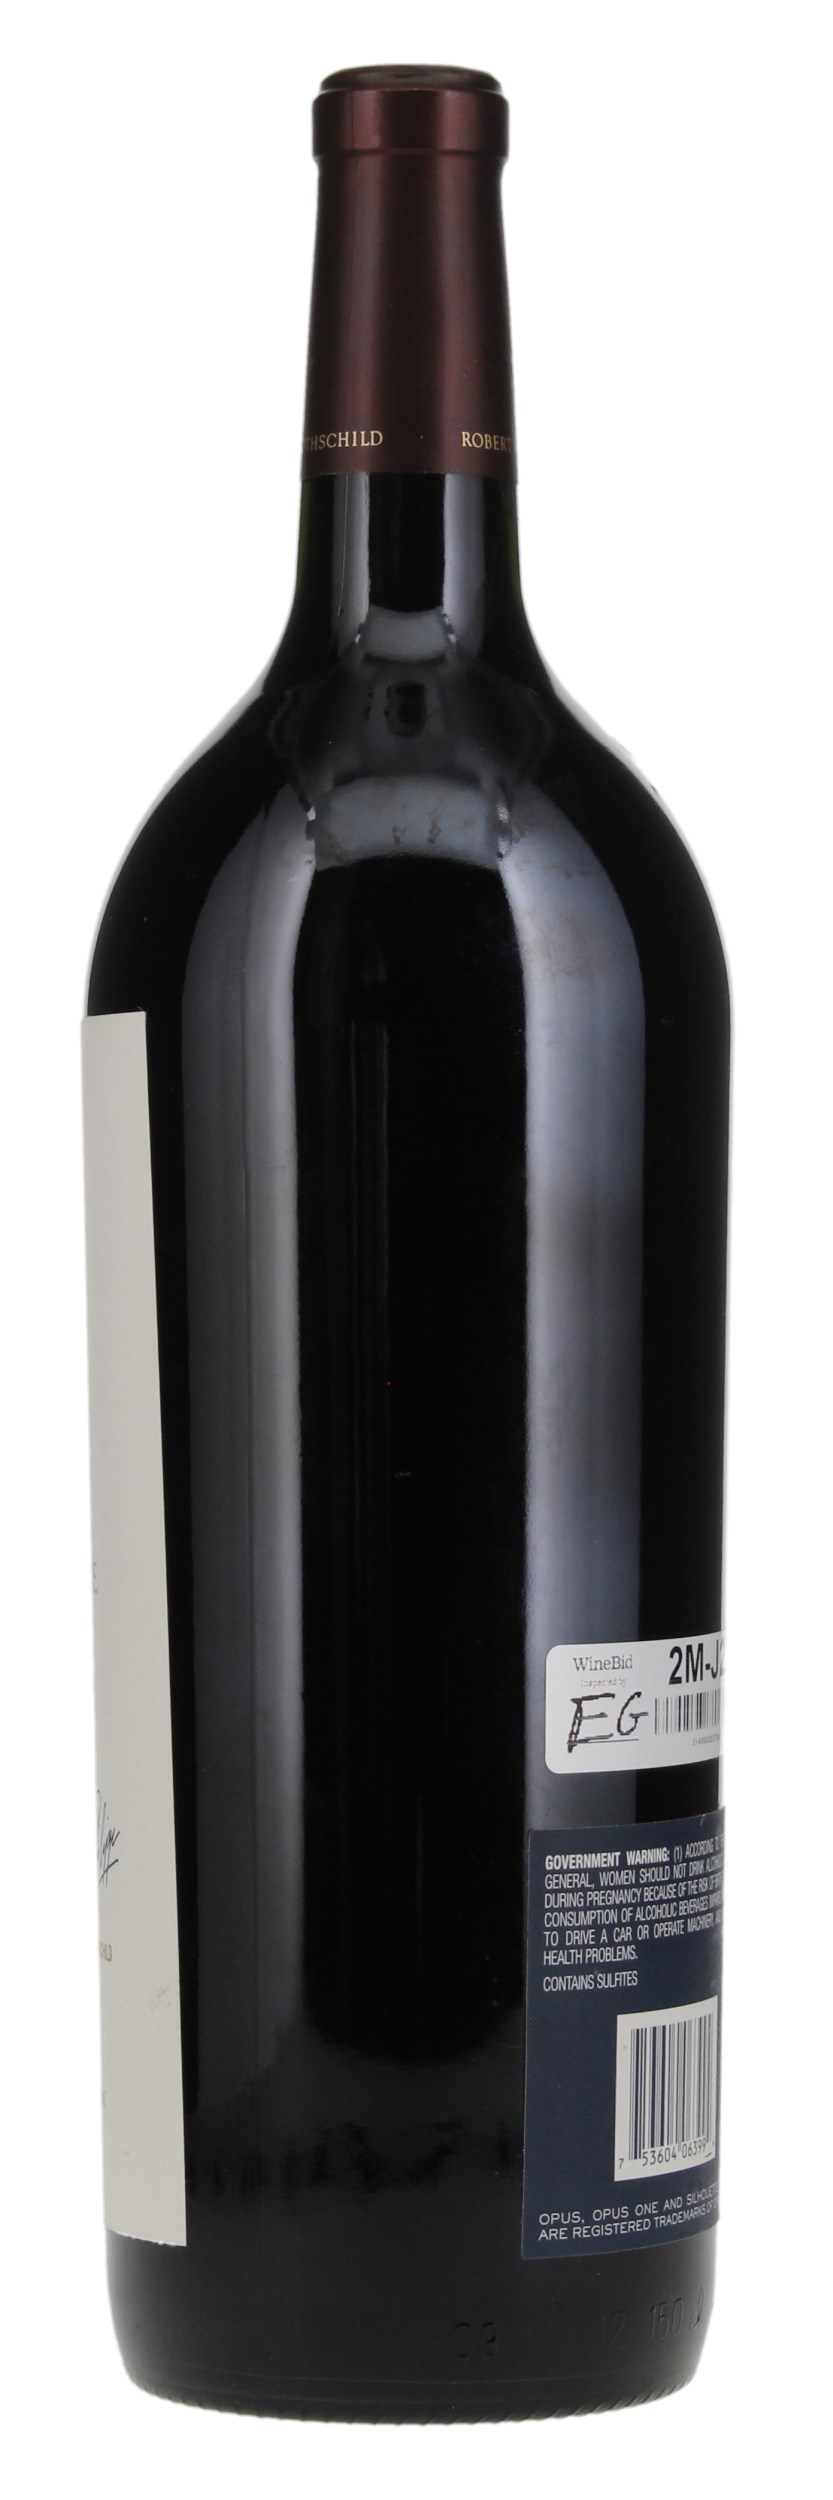 1999 Opus One, 1.5ltr